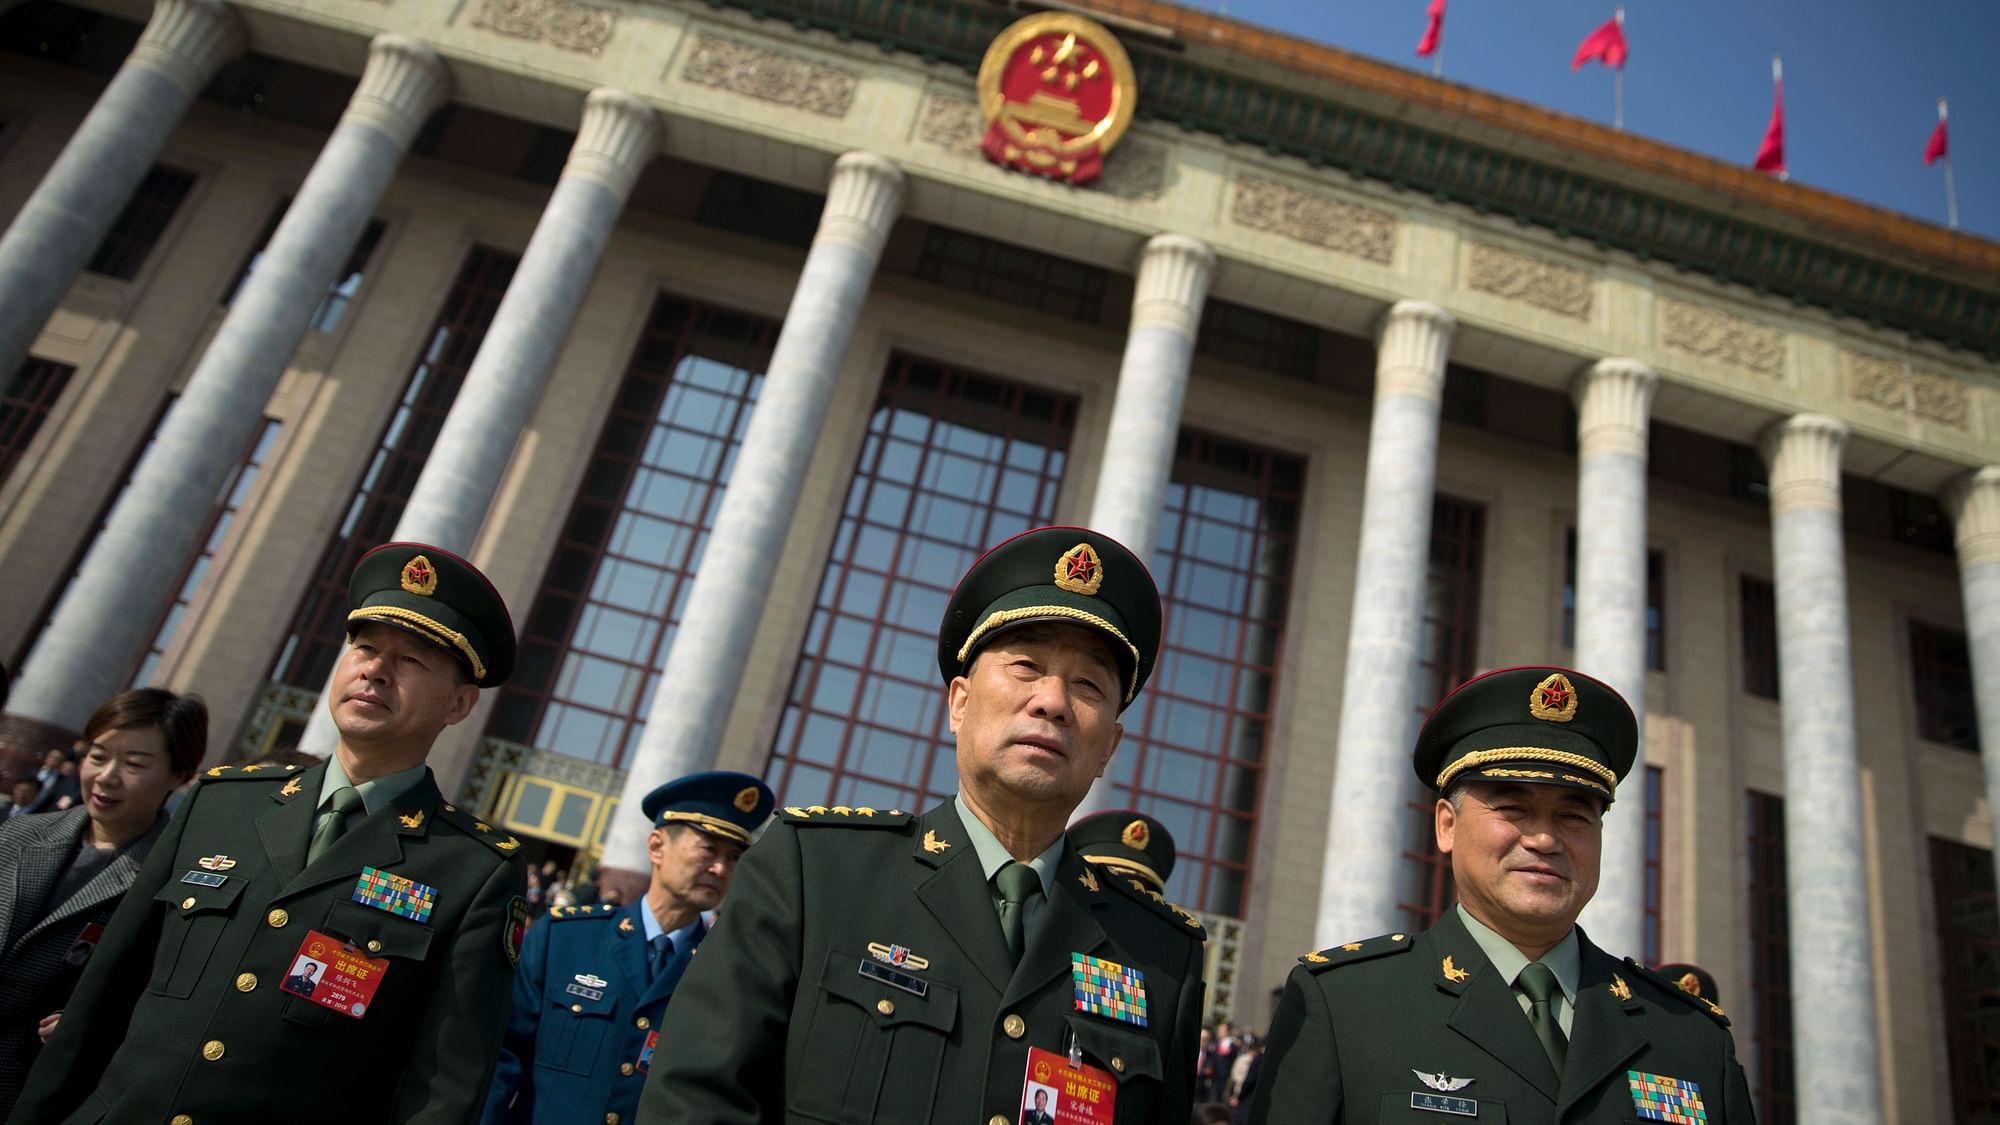 In this 4 March 2019 photo, military delegates leave after a meeting one day before the opening session of China’s National People’s Congress (NPC) at the Great Hall of the People in Beijing. To a remarkable degree, the Pentagon’s new budget proposal is shaped by national security threats that Acting Defense Secretary Patrick Shanahan has summarized in three words: “China, China, China.”